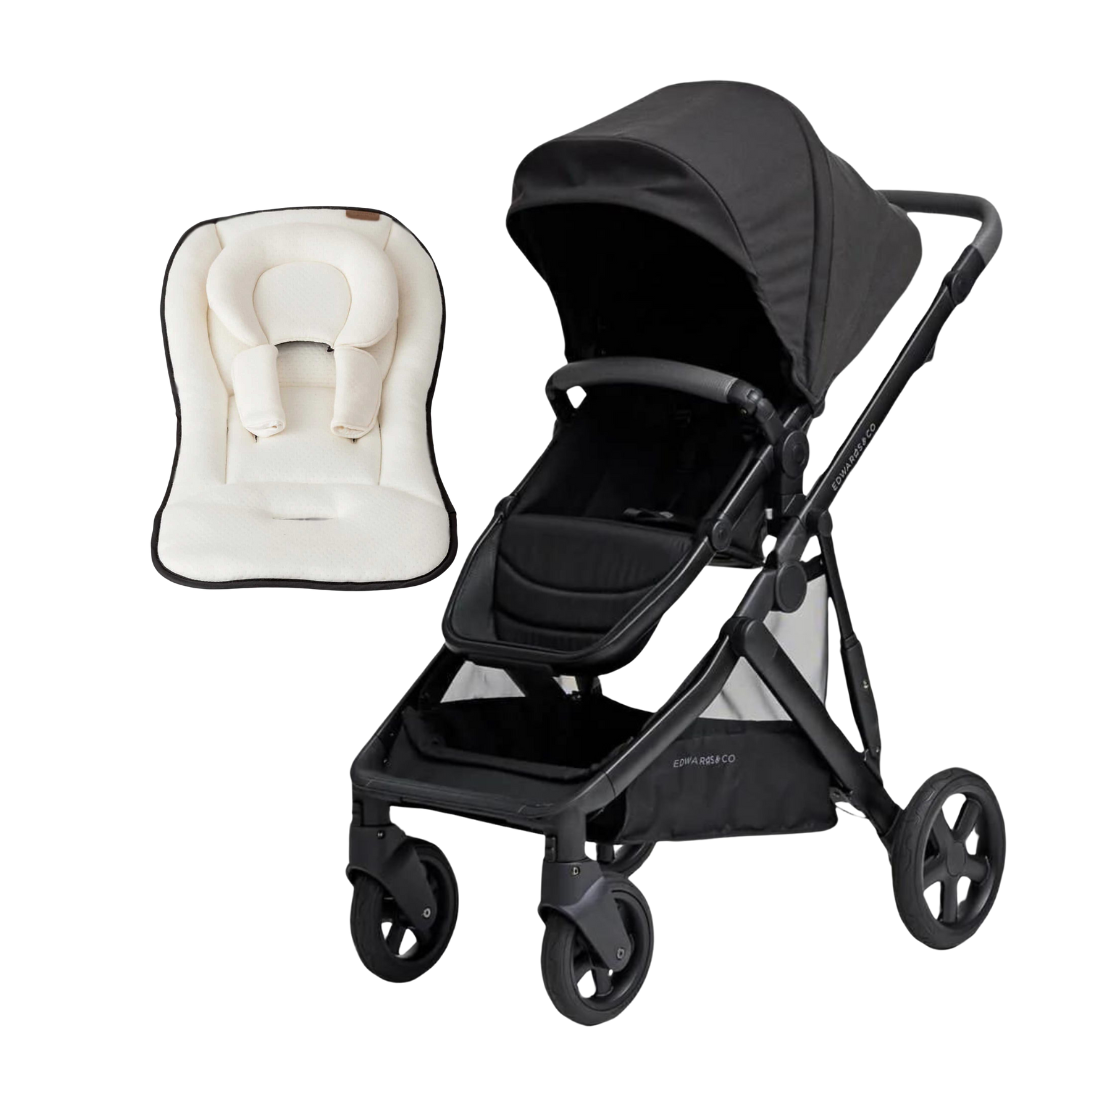 Edwards & Co Olive Stroller BLACK LUX Free Newborn Cushion - Tiny Tots Baby Store 